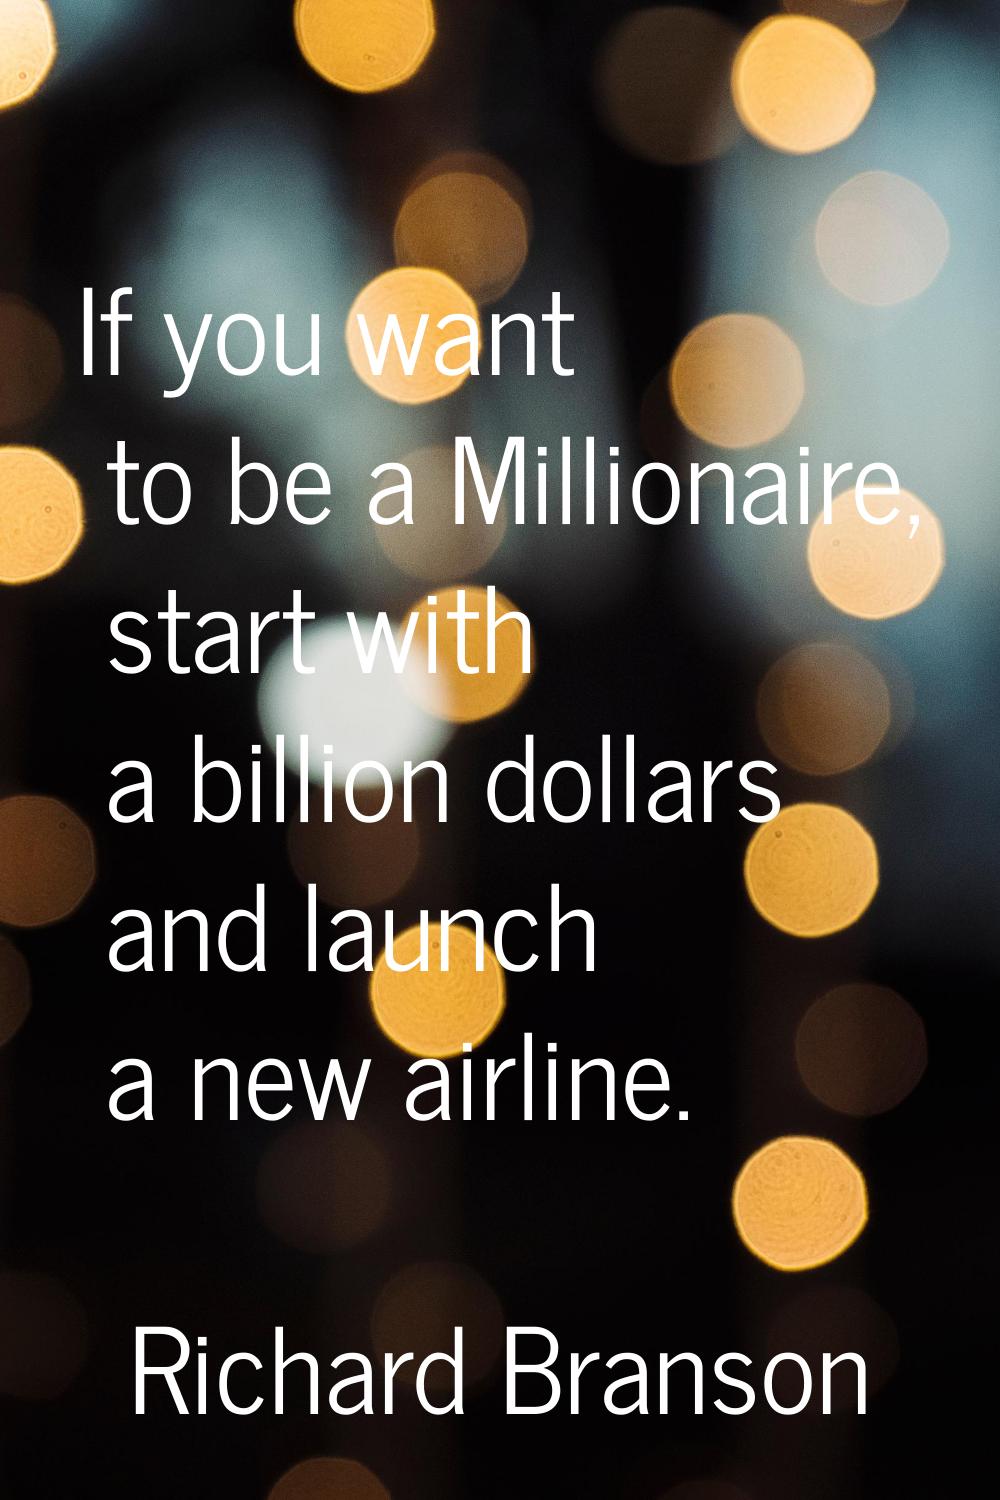 If you want to be a Millionaire, start with a billion dollars and launch a new airline.